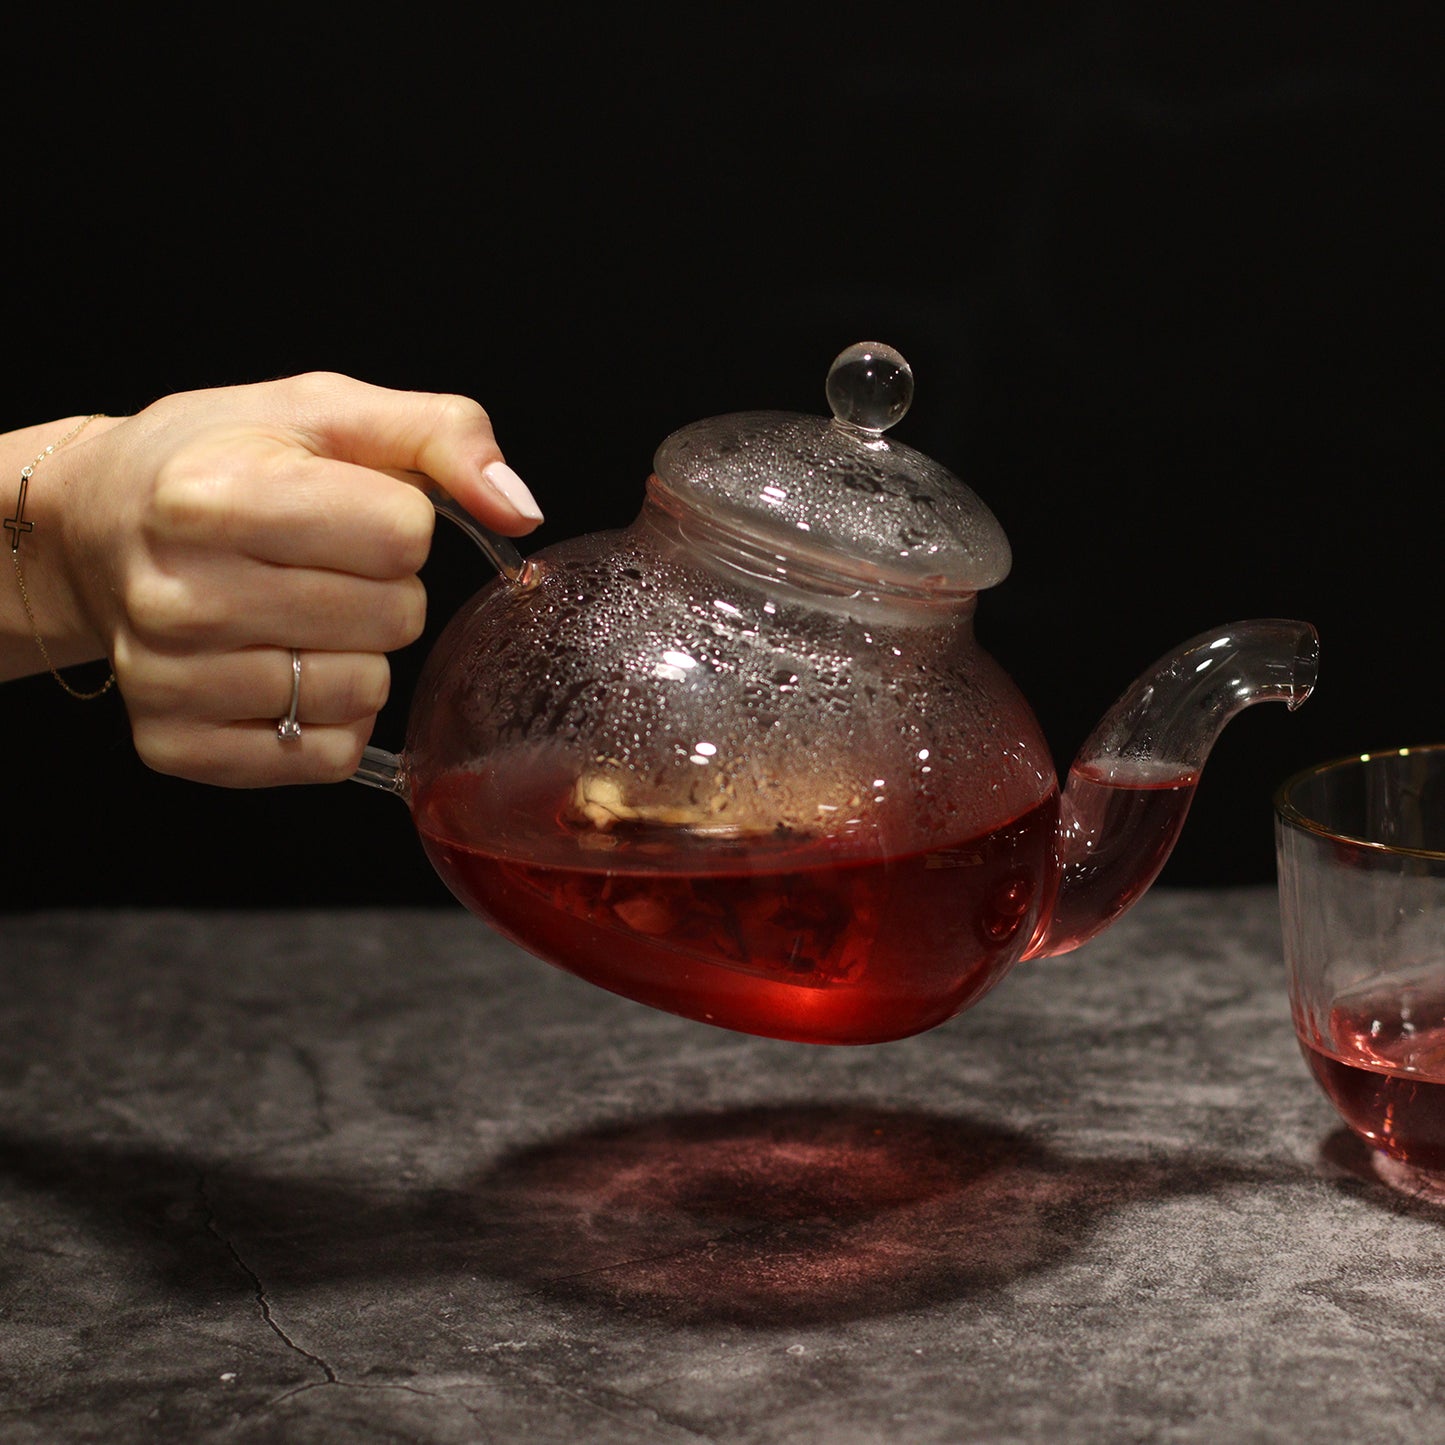 Glass Infuser Teapot - Round Pearl - 800ml